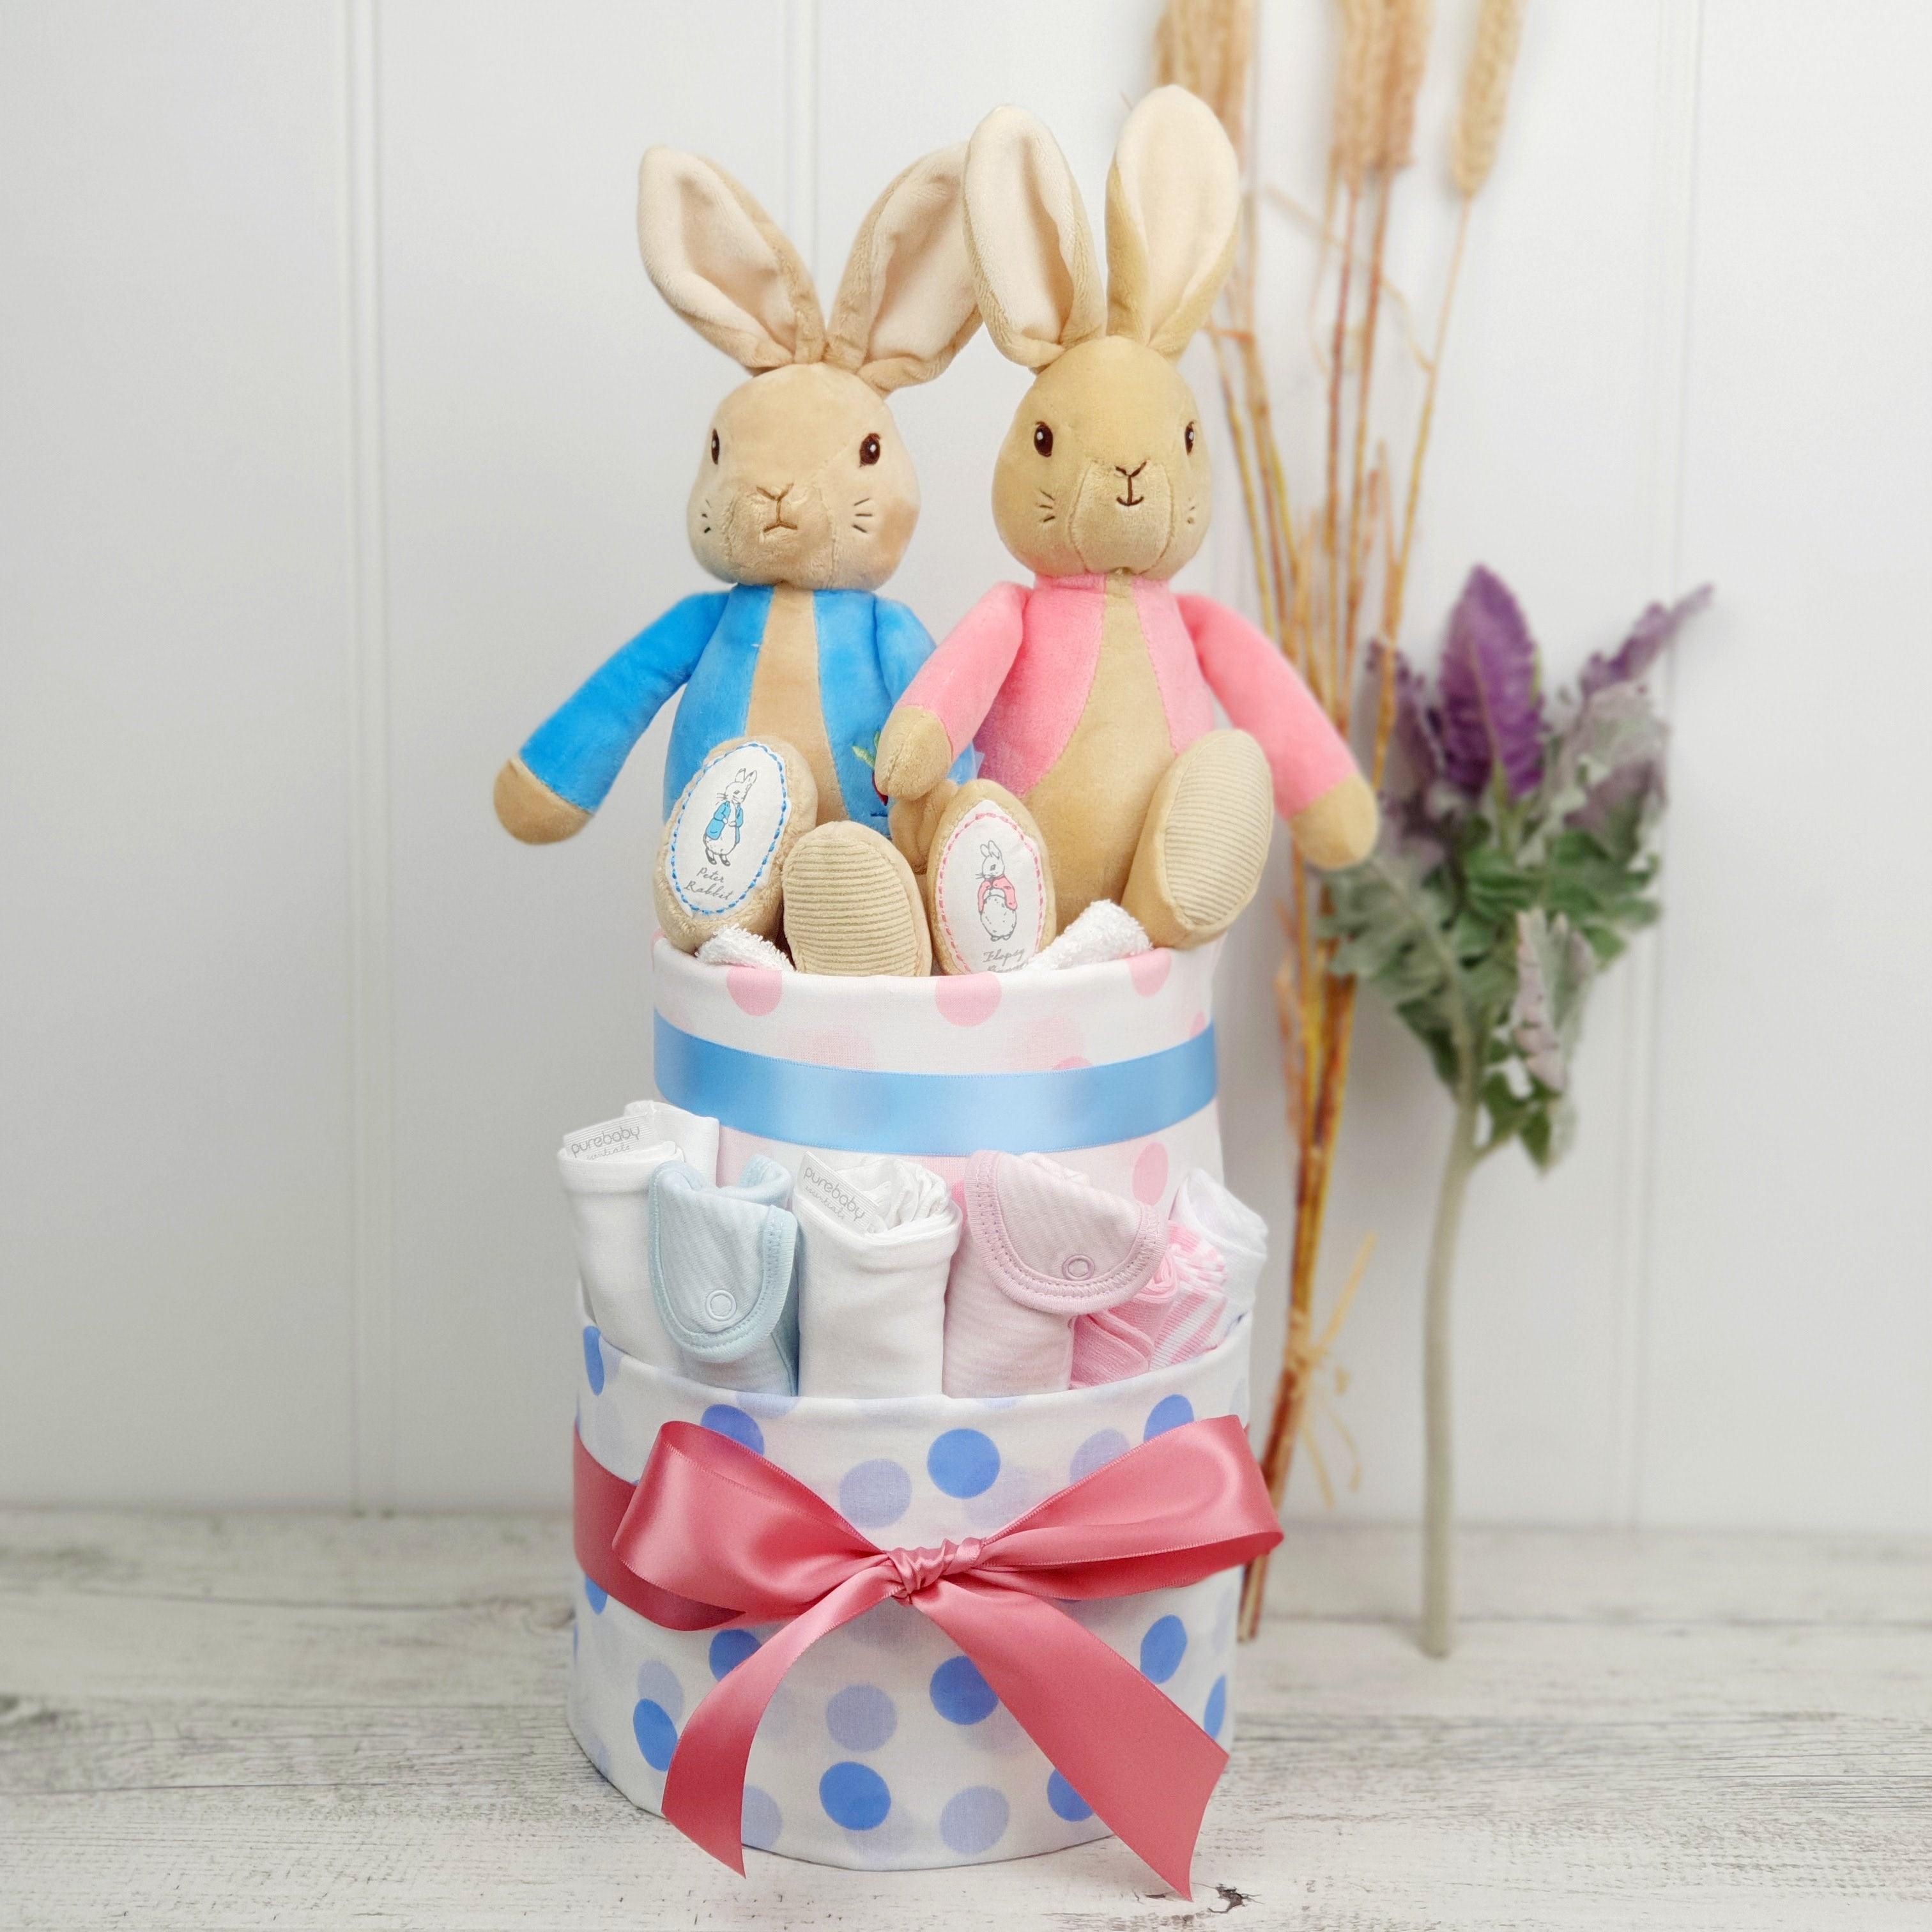 Peter Rabbit and Flopsy Bunny Twins Premium Nappy Cake - Perfect Little Bundles